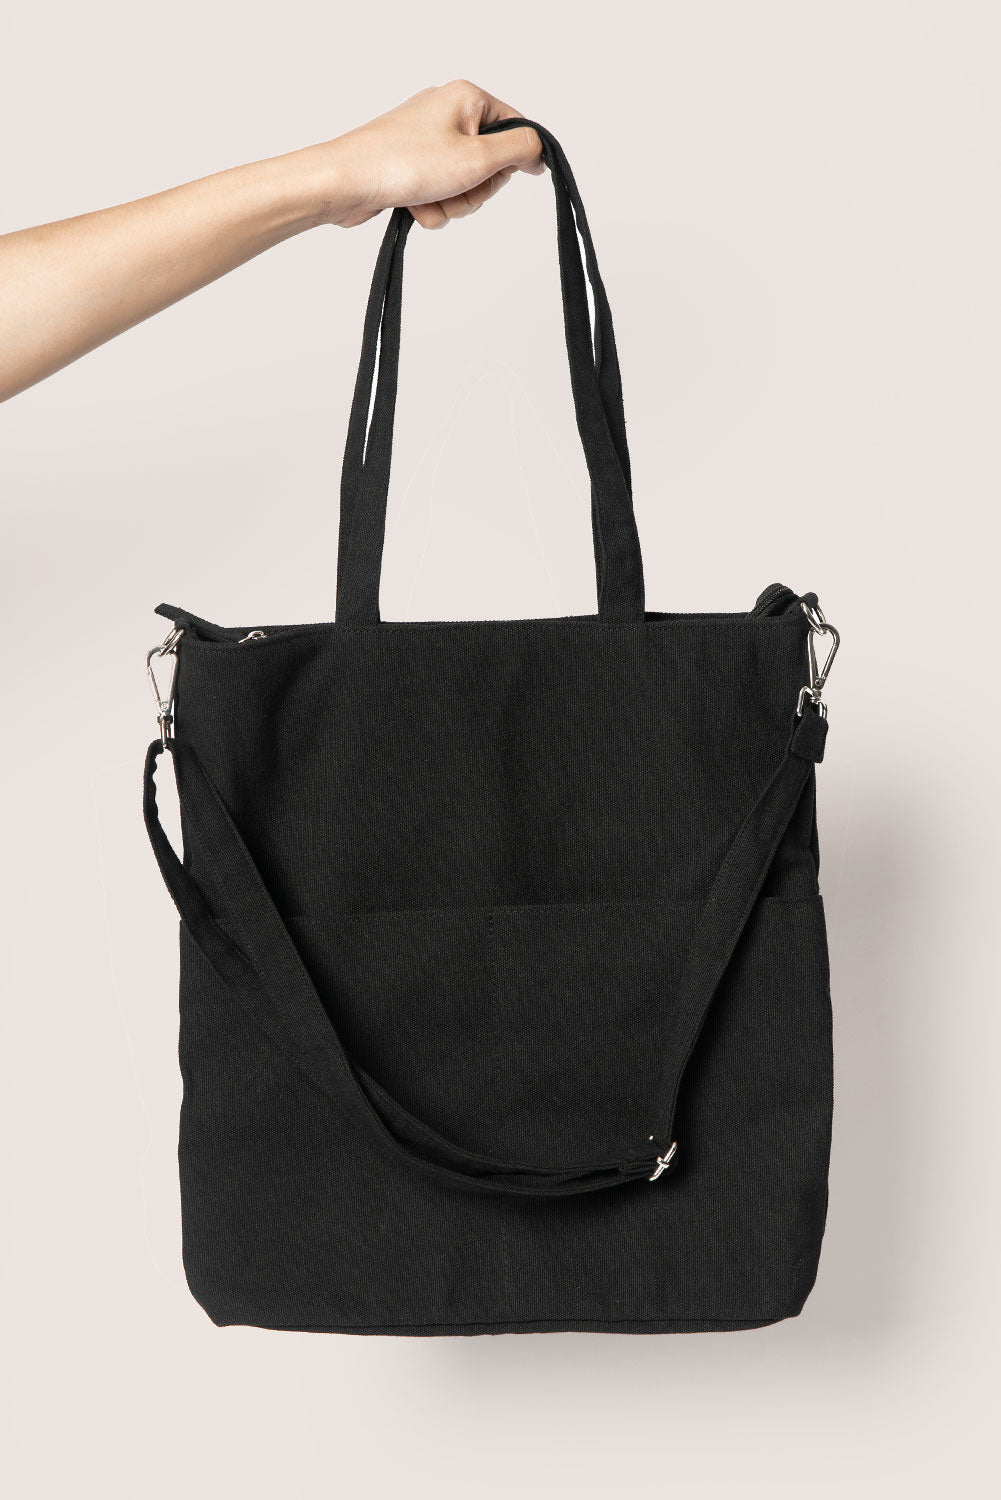 Accessorize London Kea Metallic Print Beach Tote Bag: Buy Accessorize  London Kea Metallic Print Beach Tote Bag Online at Best Price in India |  Nykaa